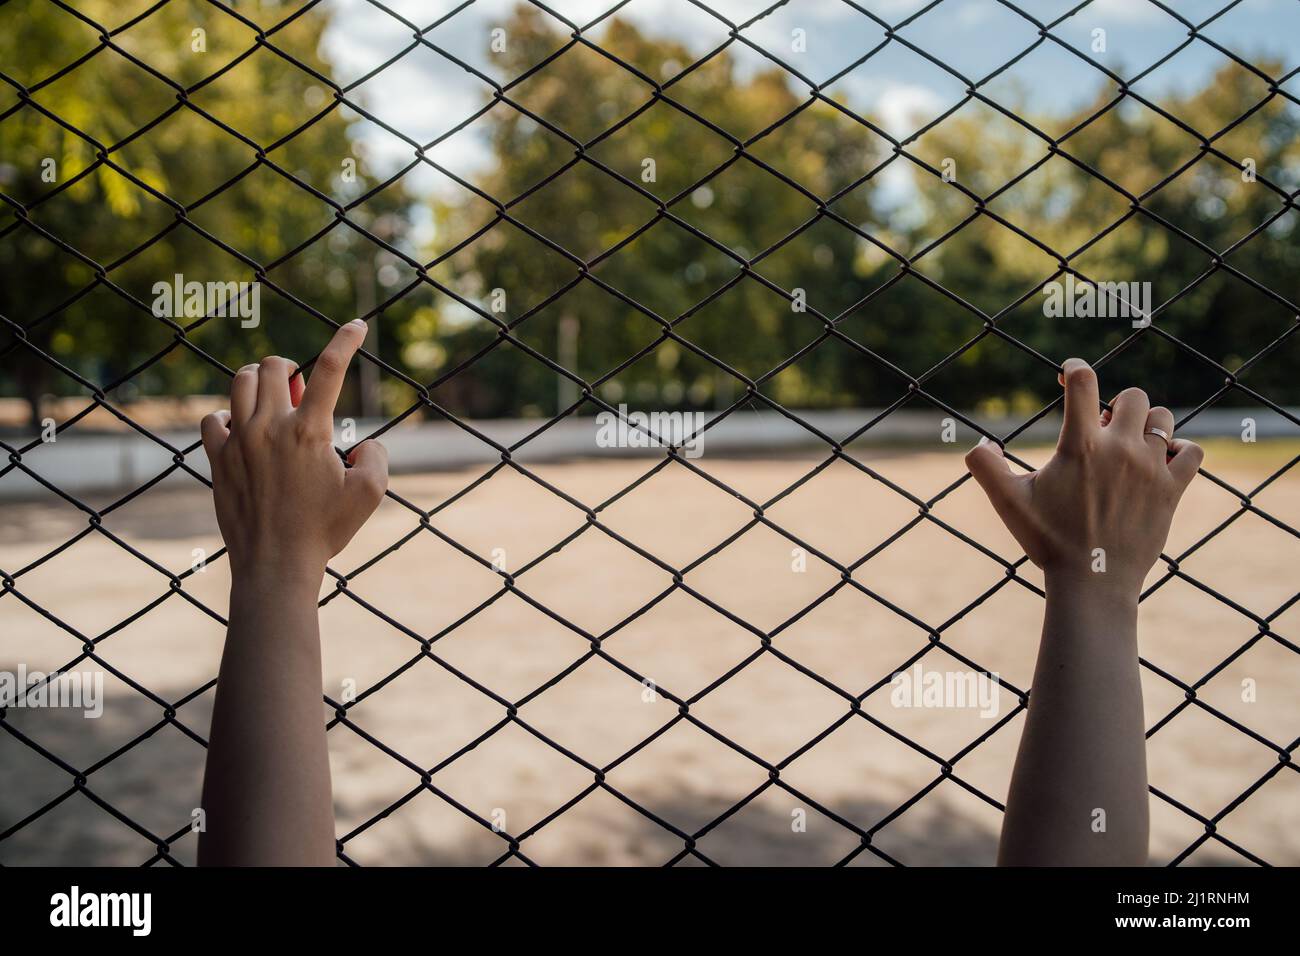 The hands on the lattice are symbolize limitation in something. Stock Photo